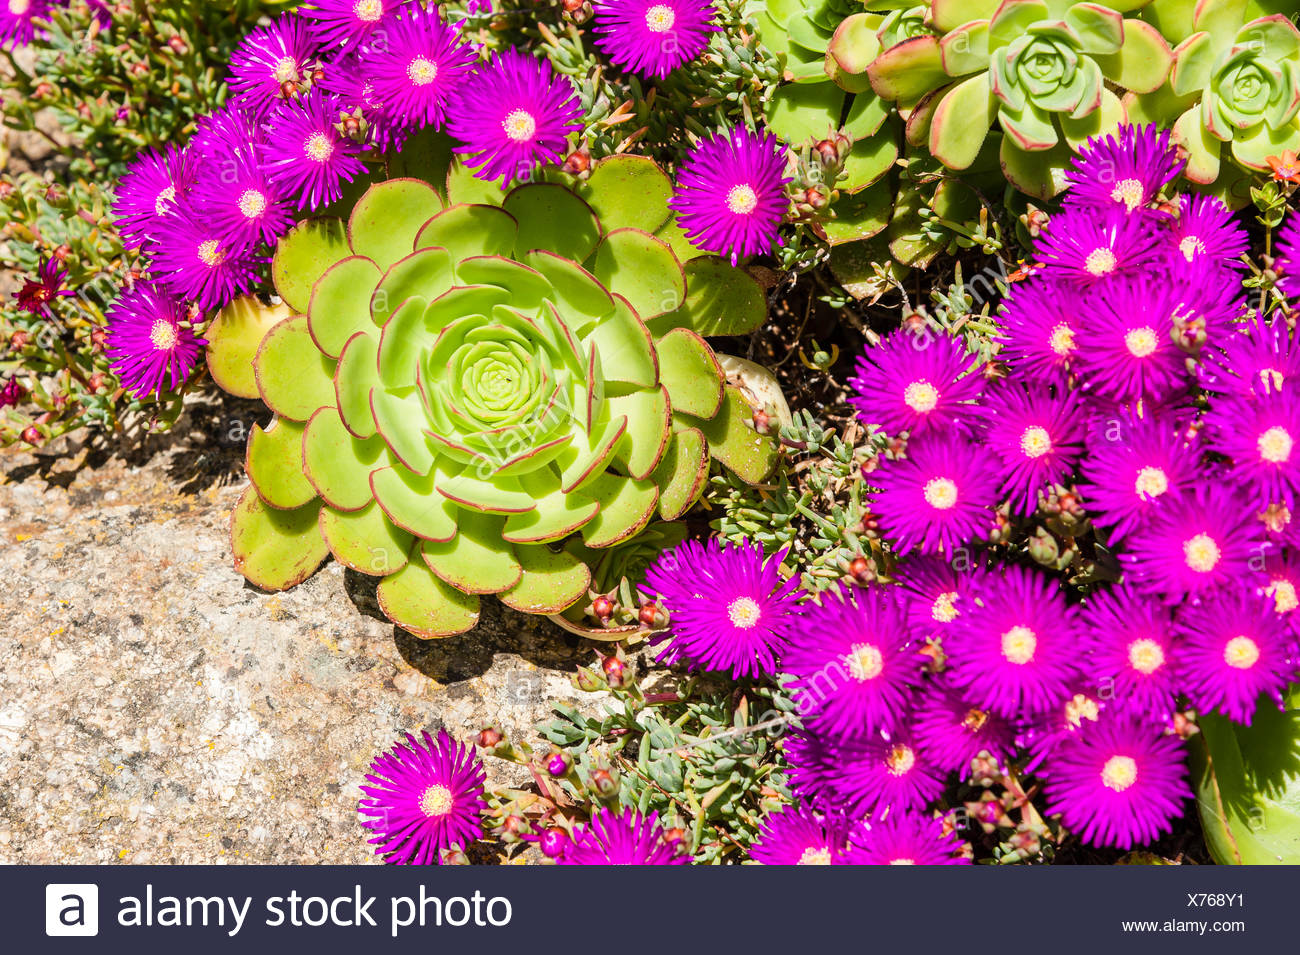 High Angle View Of Succulent Plant And Purple Flowers Growing In Park Stock Photo Alamy